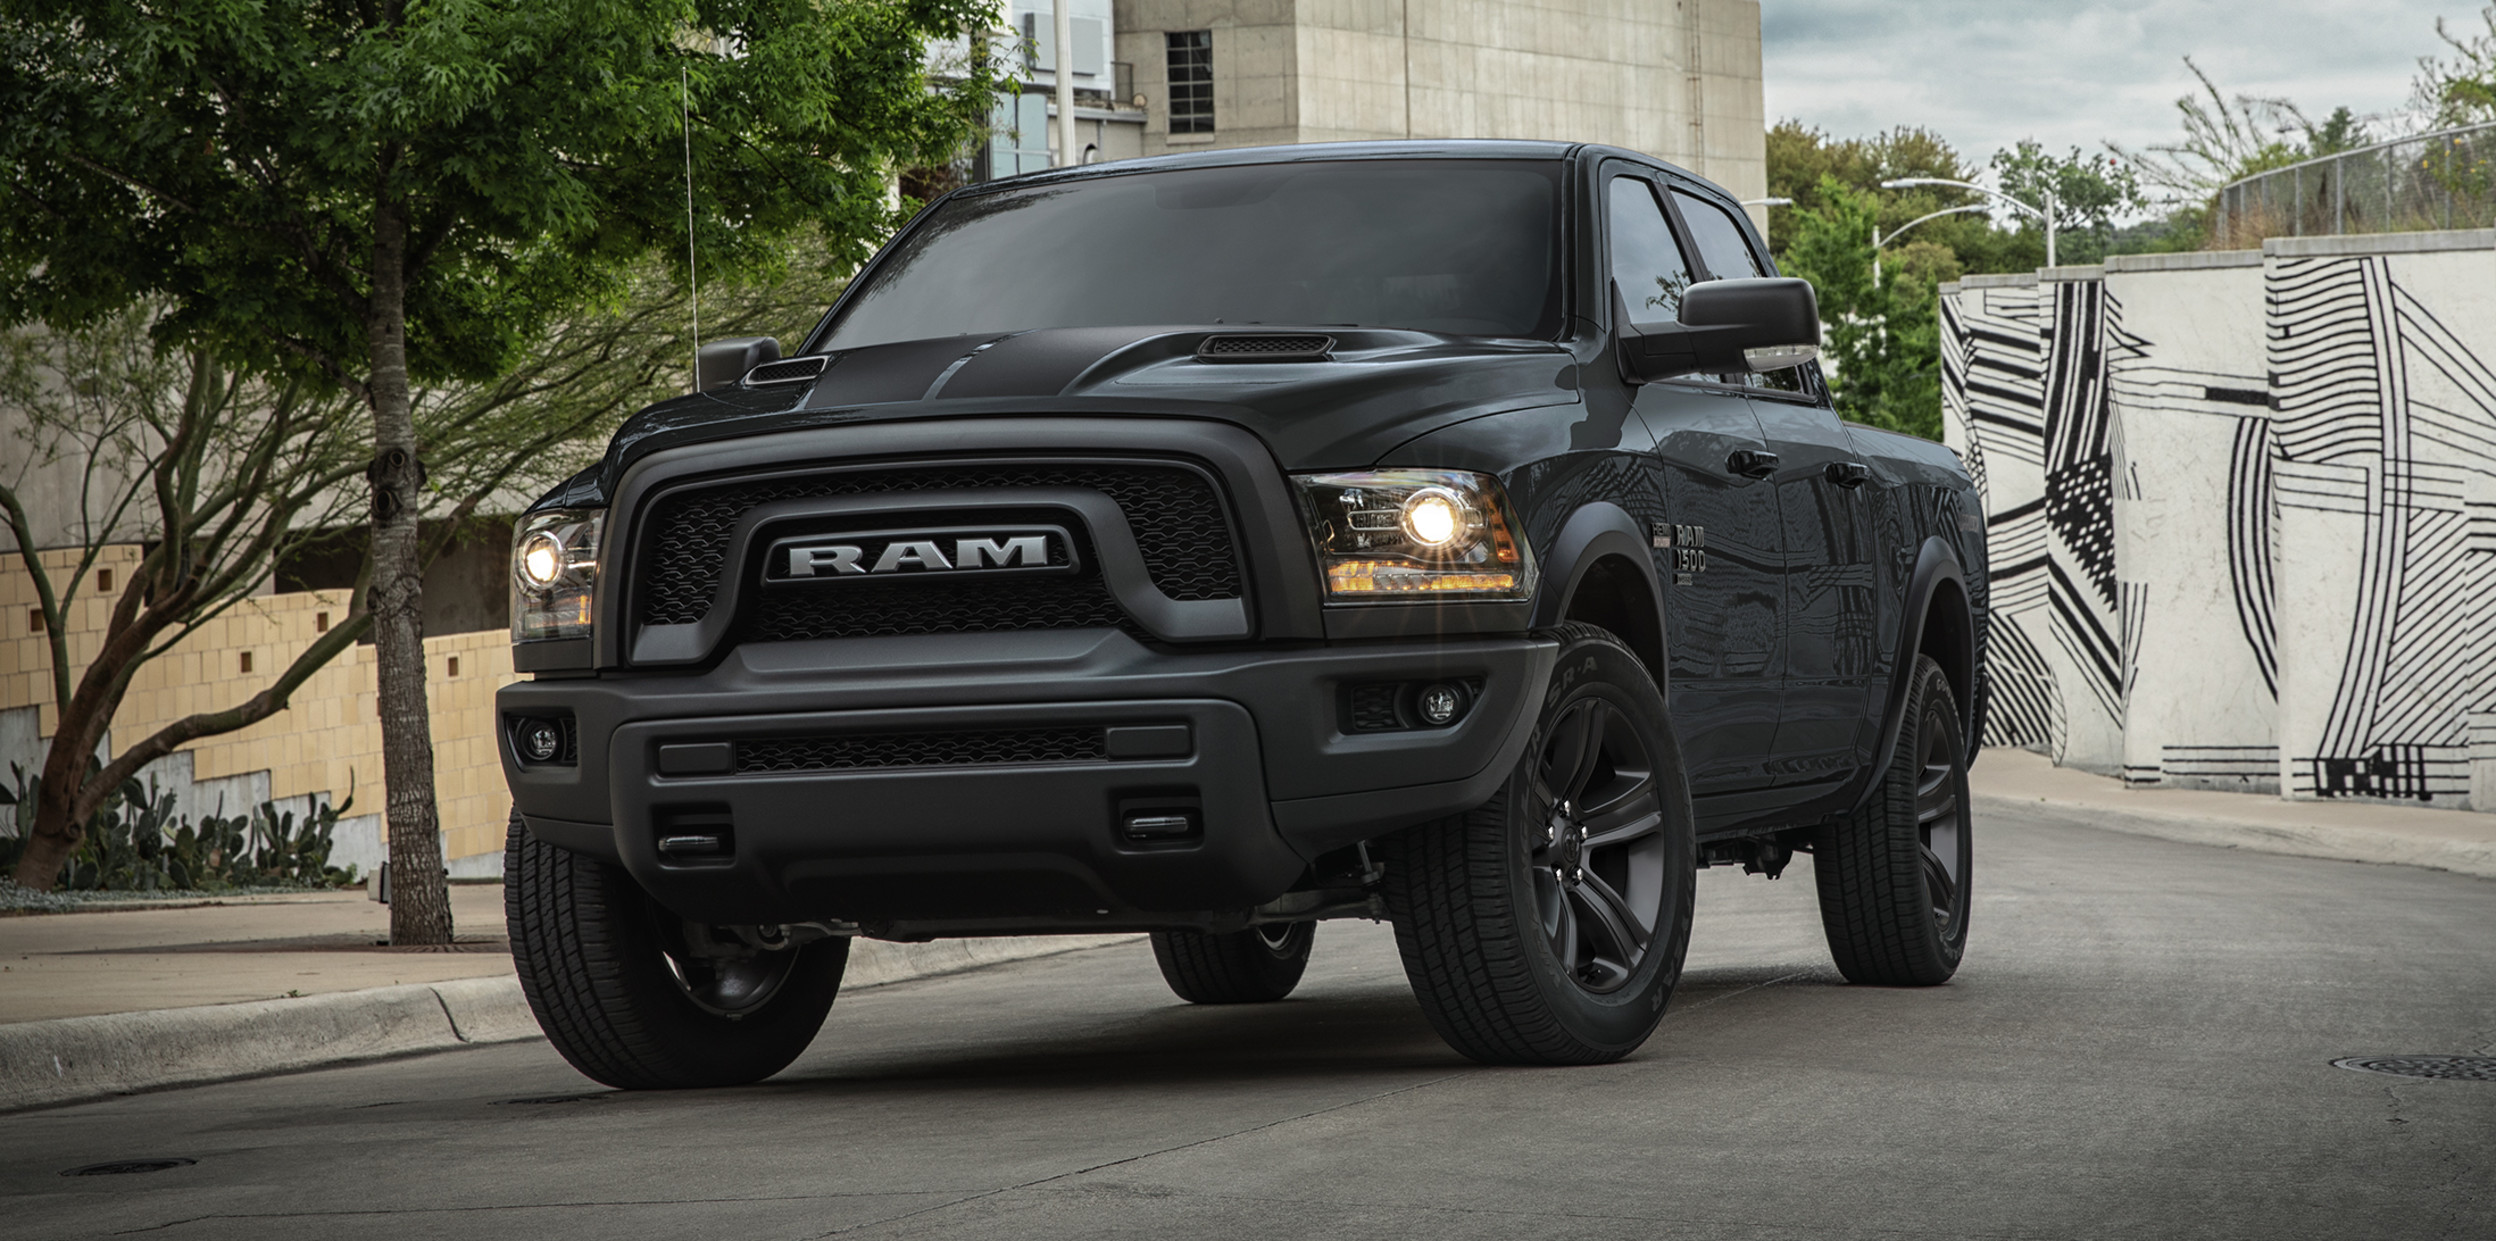 A black 2022 Ram 1500 Classic, being driven on a paved road with buildings and trees in the background.